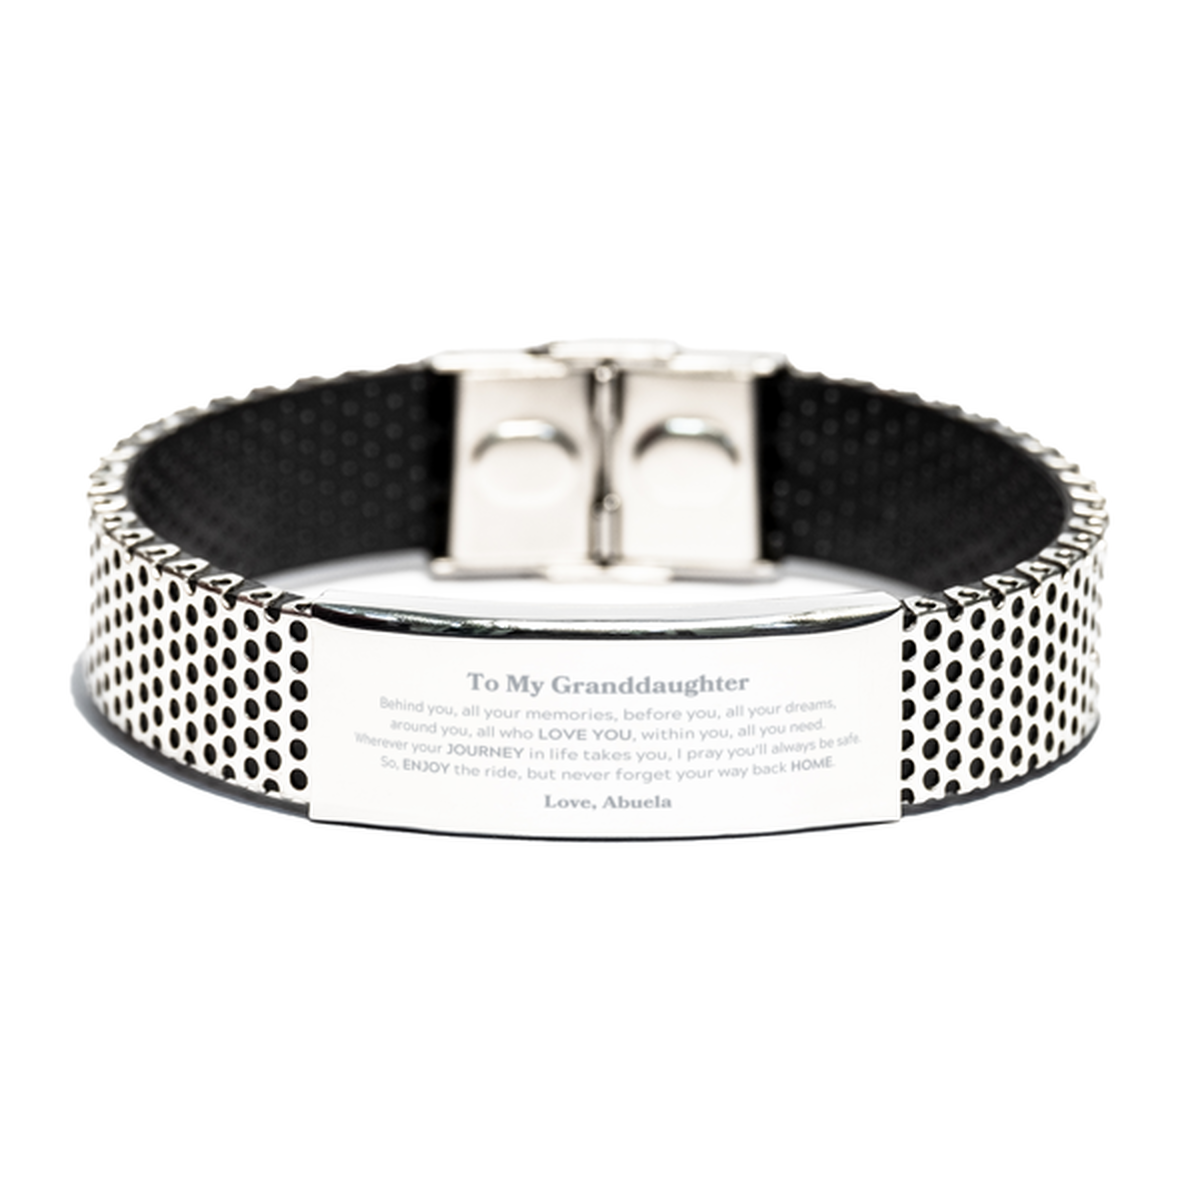 To My Granddaughter Graduation Gifts from Abuela, Granddaughter Stainless Steel Bracelet Christmas Birthday Gifts for Granddaughter Behind you, all your memories, before you, all your dreams. Love, Abuela